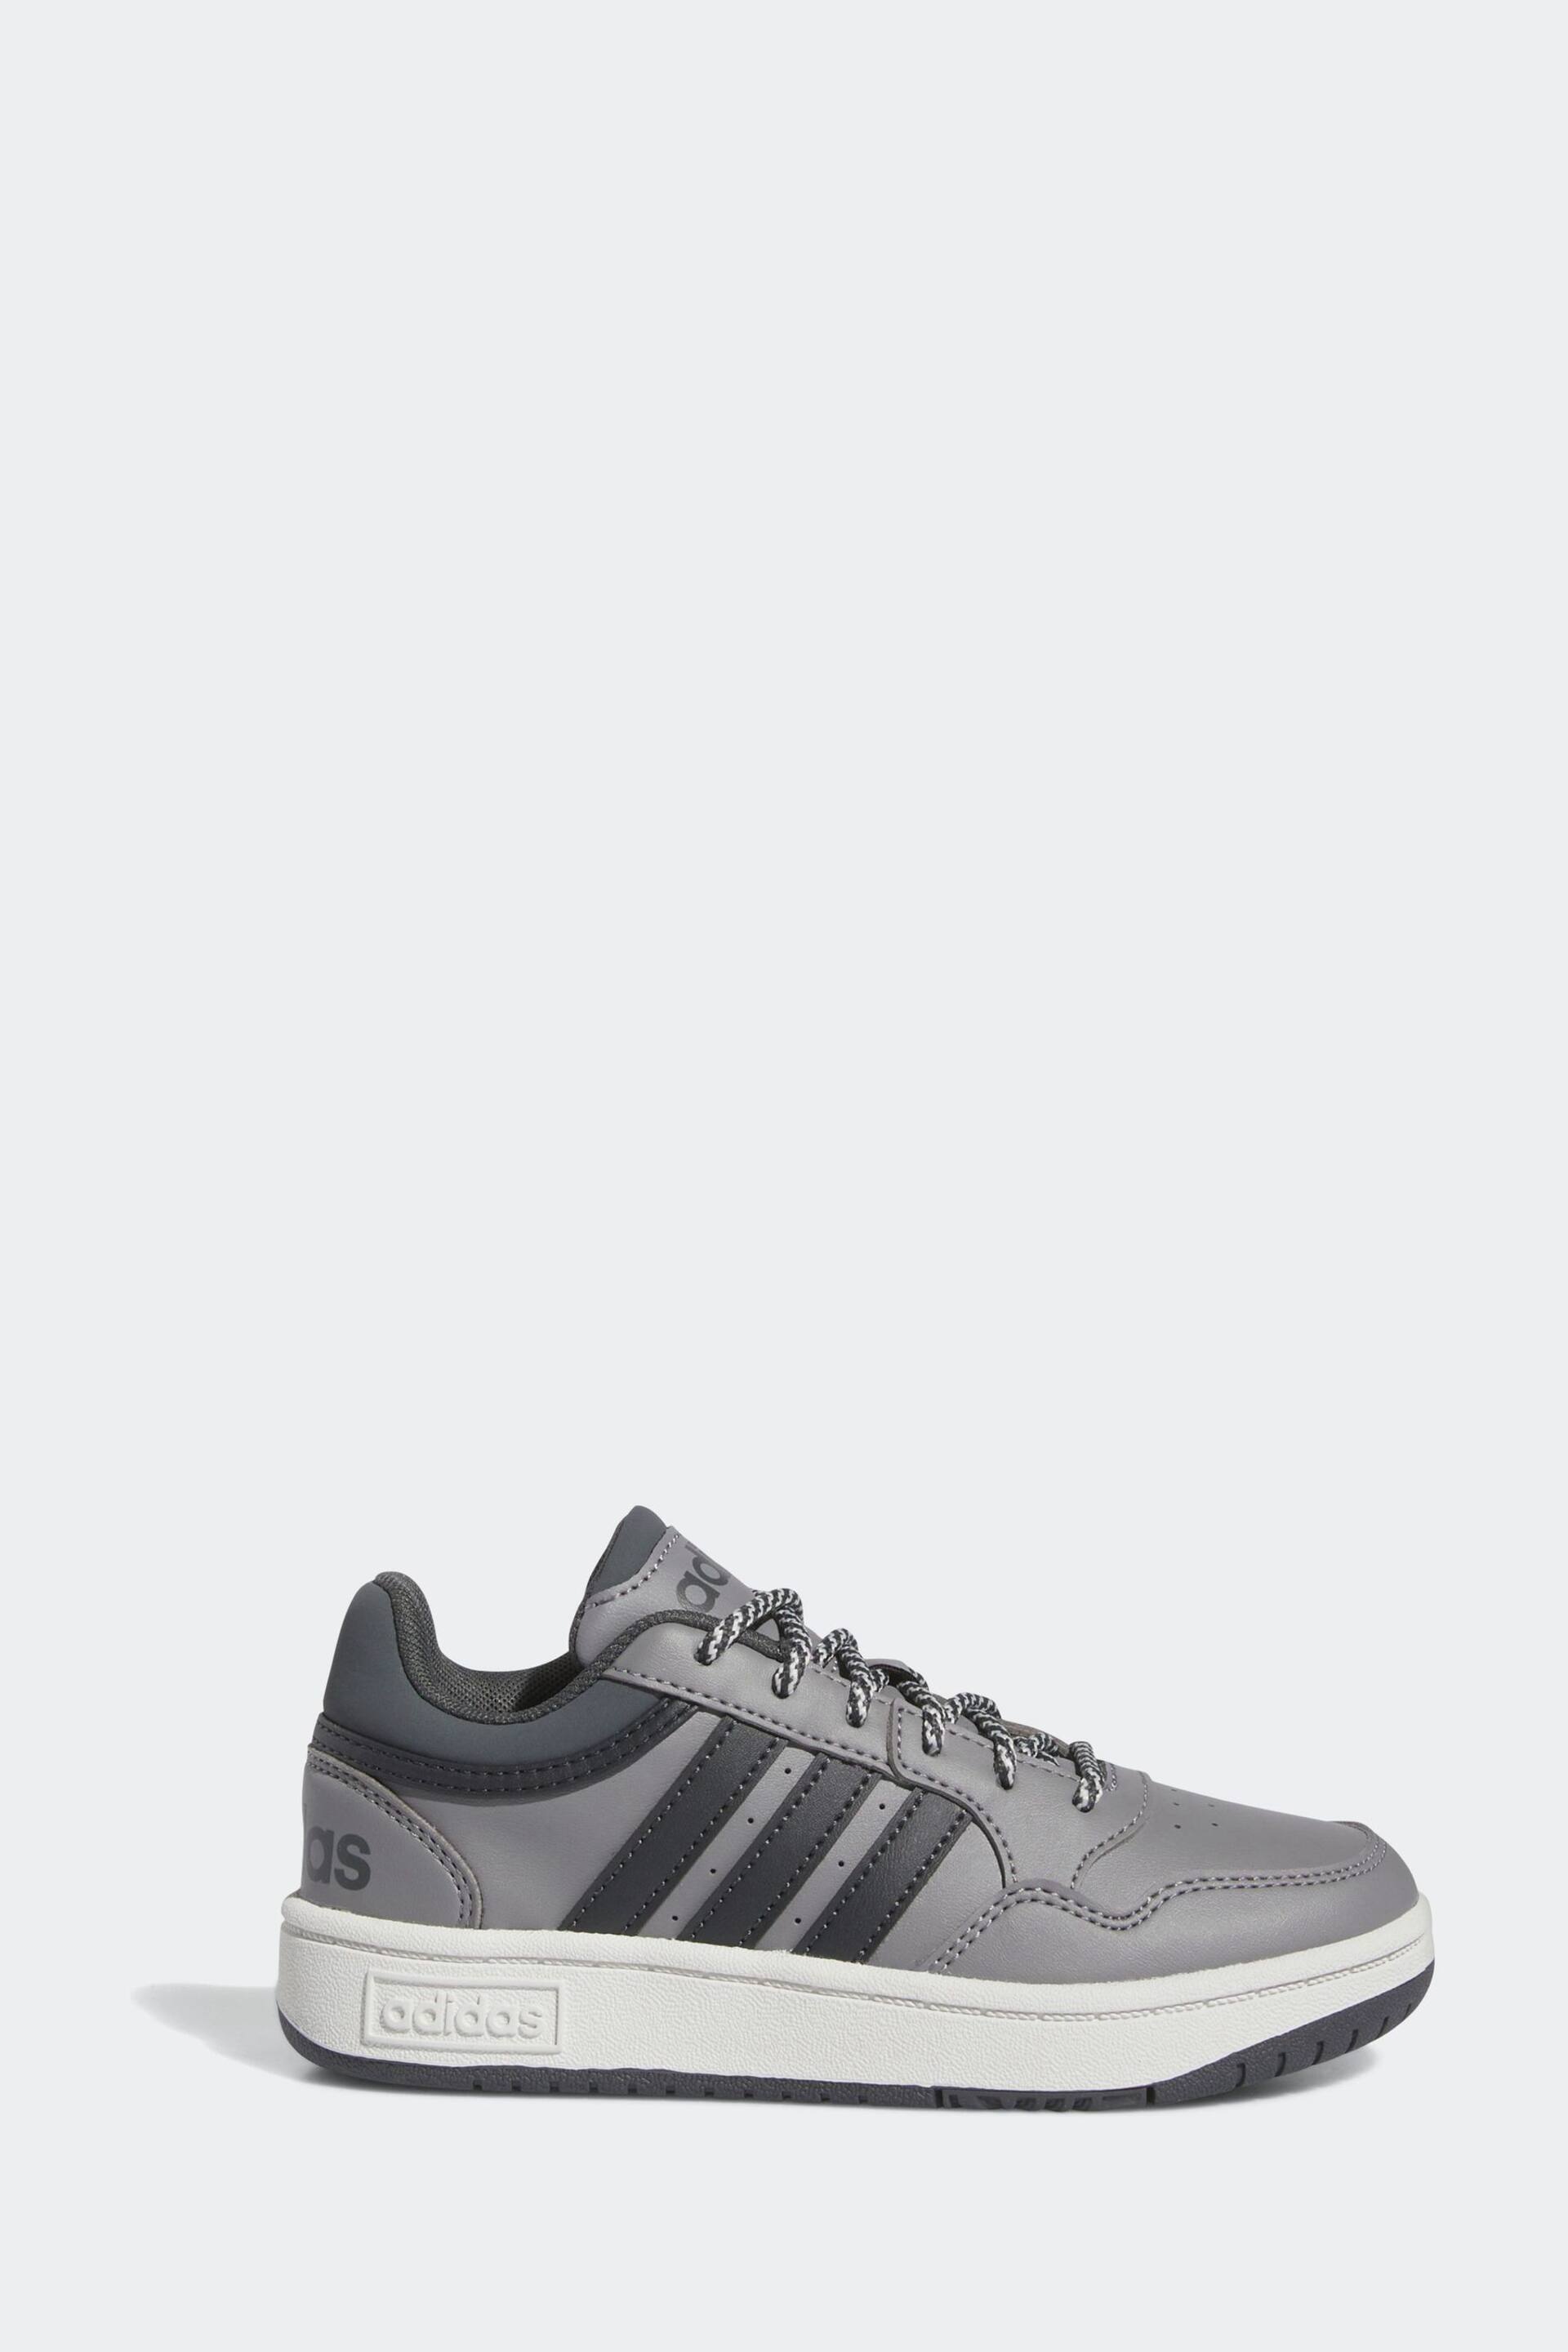 adidas Grey Hoops Trainers - Image 1 of 6